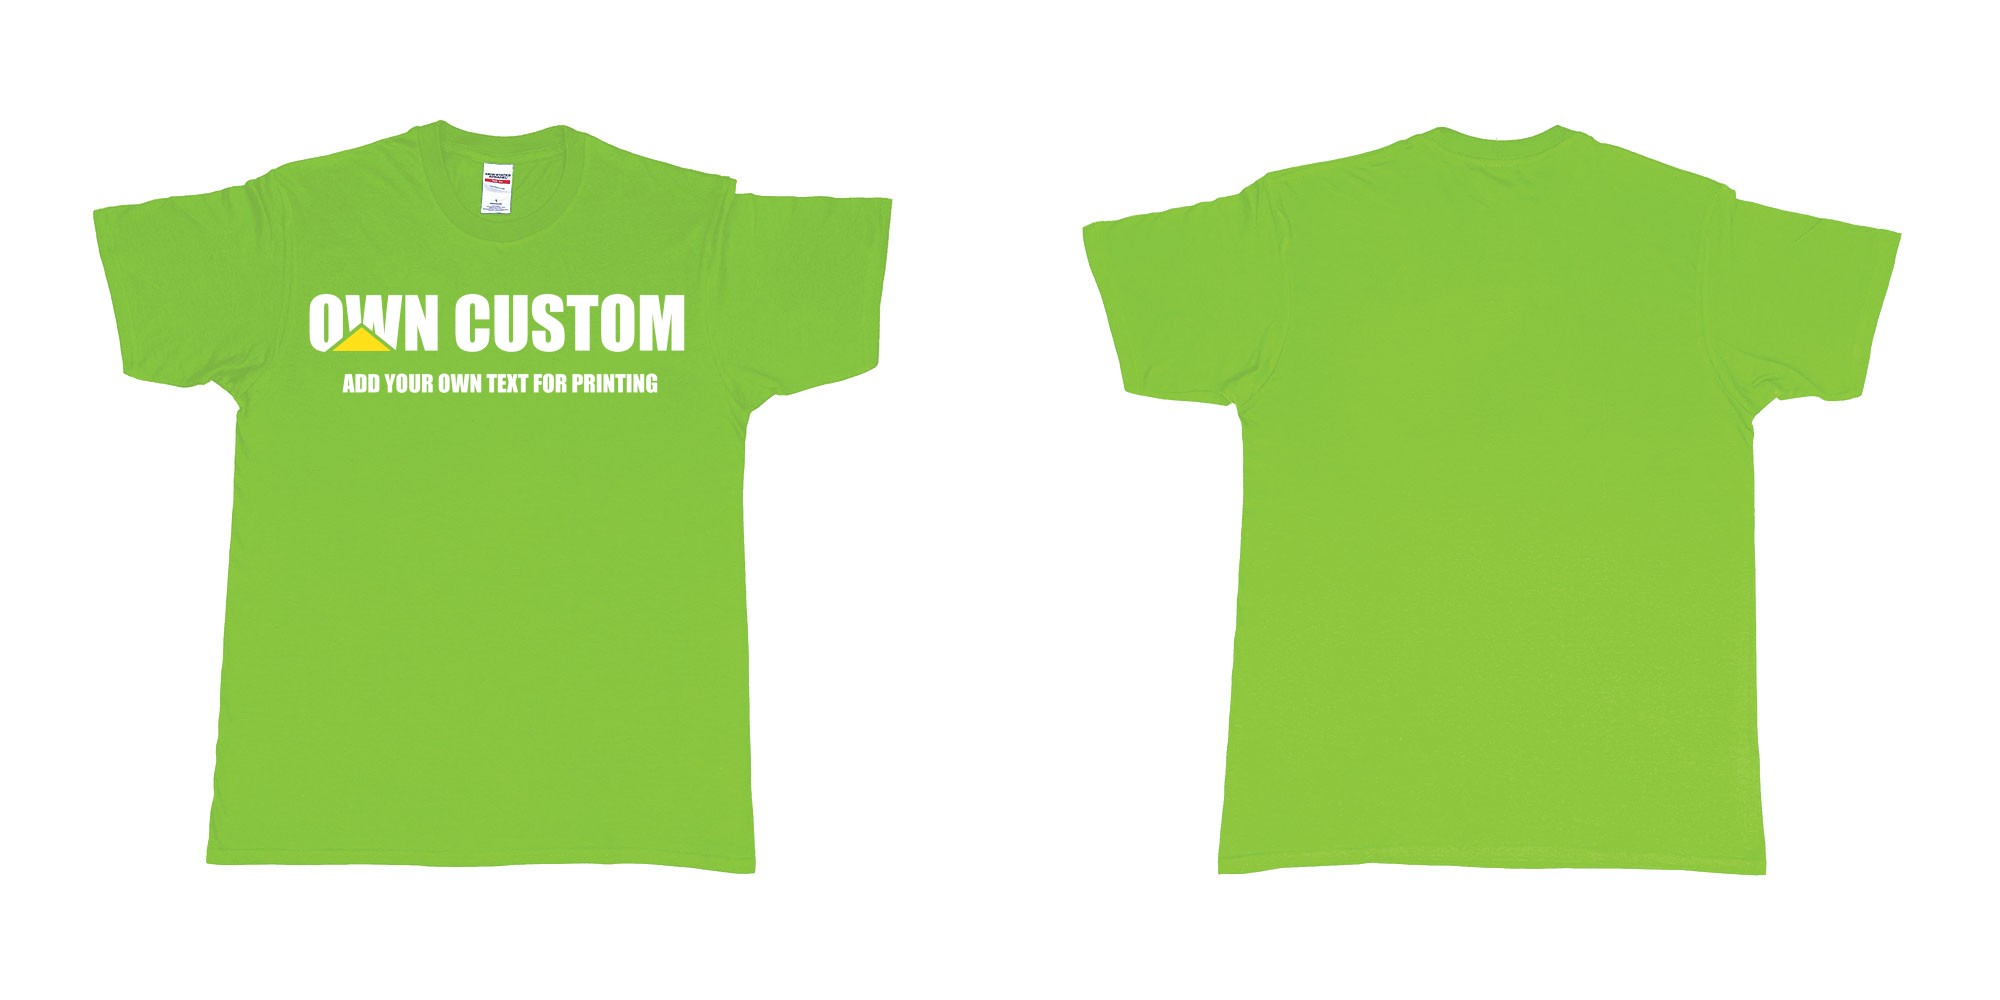 Custom tshirt design caterpillar inc logo custom text printing shirt in fabric color lime choice your own text made in Bali by The Pirate Way